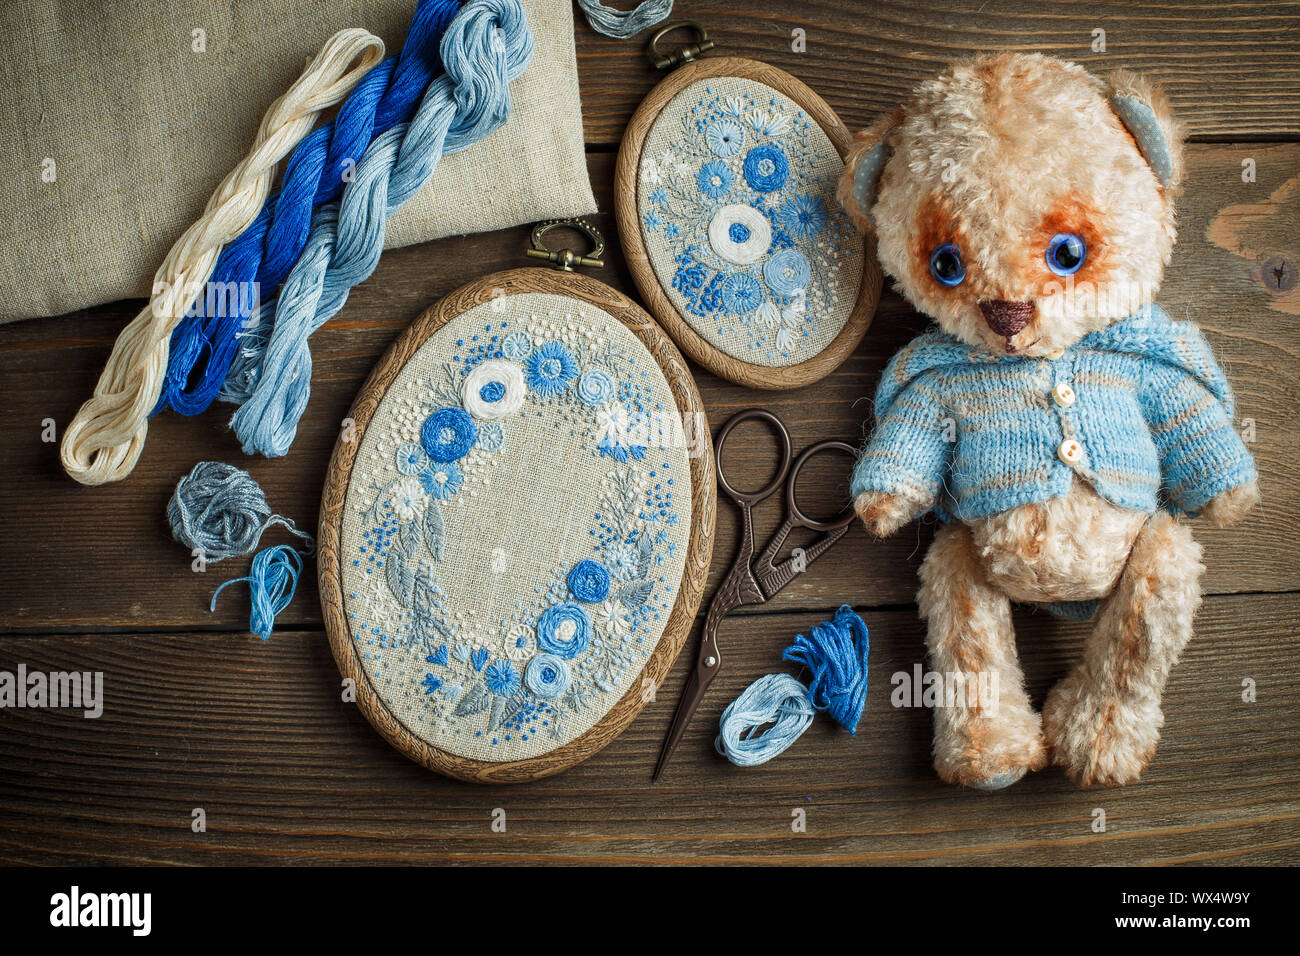 Two embroideries in decorative frames, accessories for embroidery, and Teddy bear's toy on wooden background Stock Photo